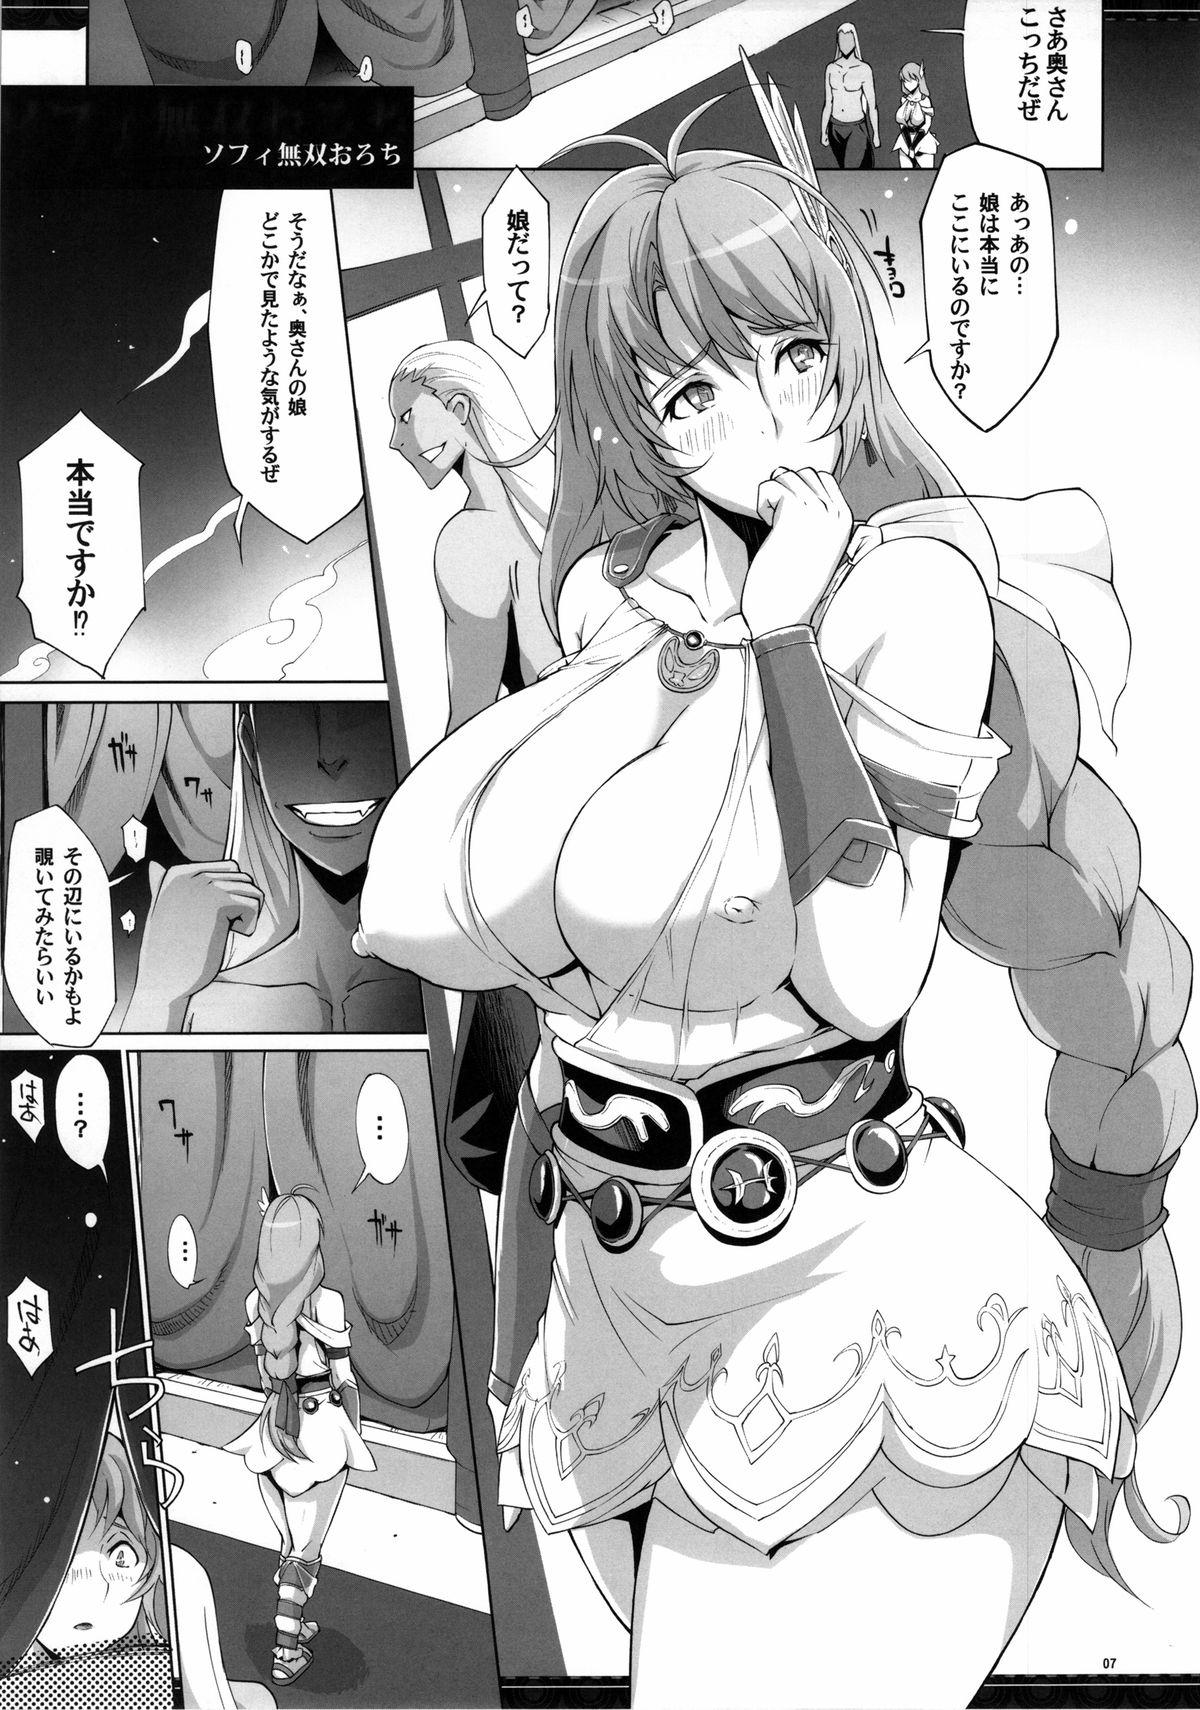 Nylons Sophie Musou Orochi - Warriors orochi Suck Cock - Page 7